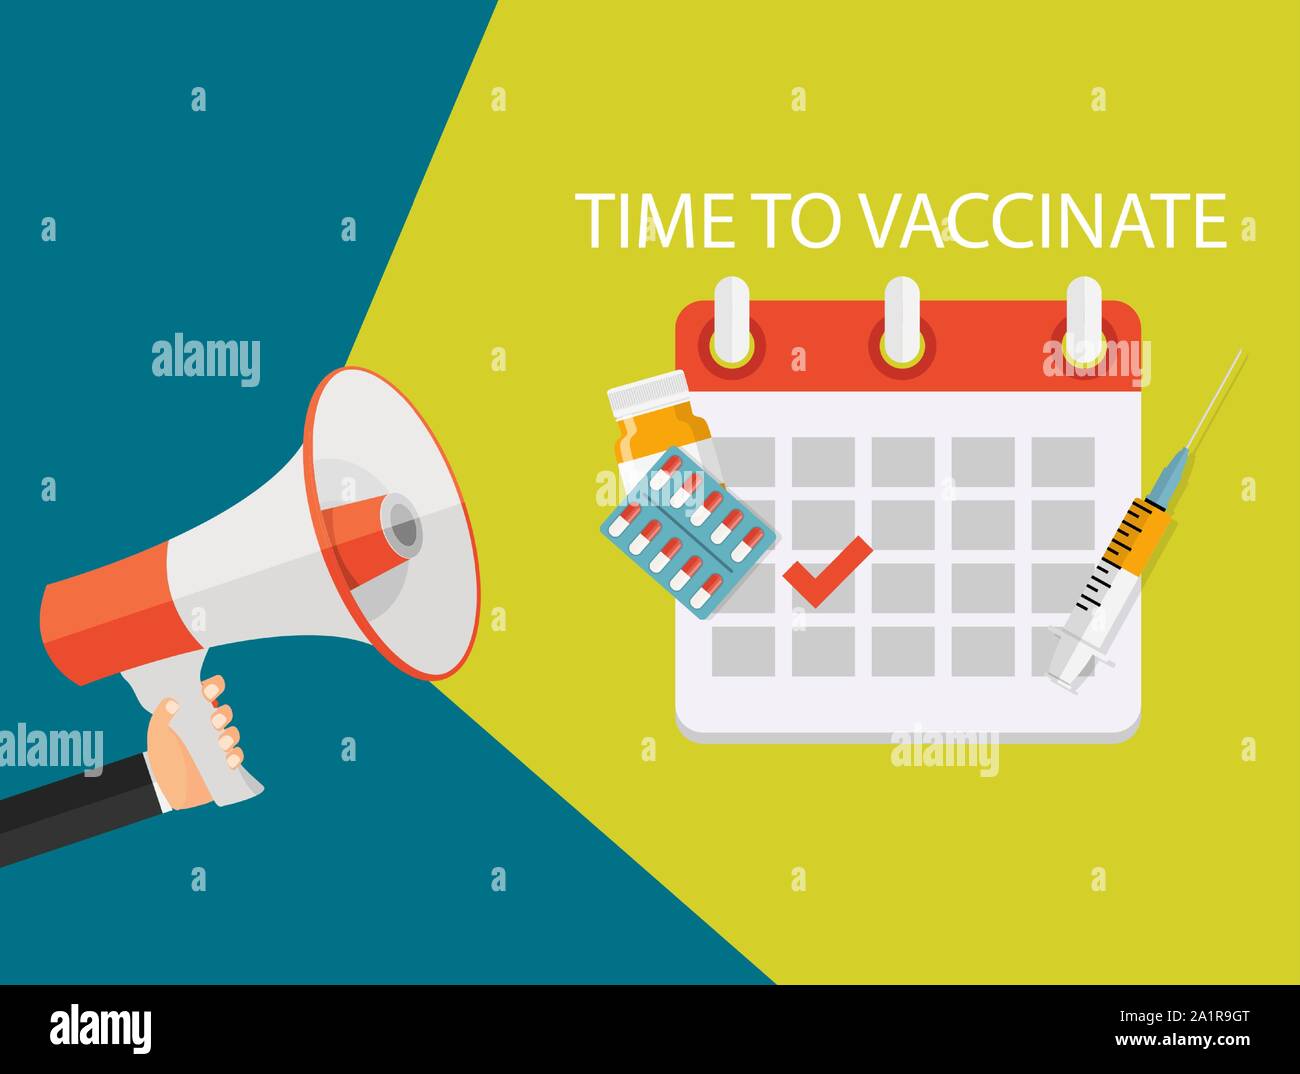 Time to Vaccinate Concept Background. Vector Illustration Stock Vector